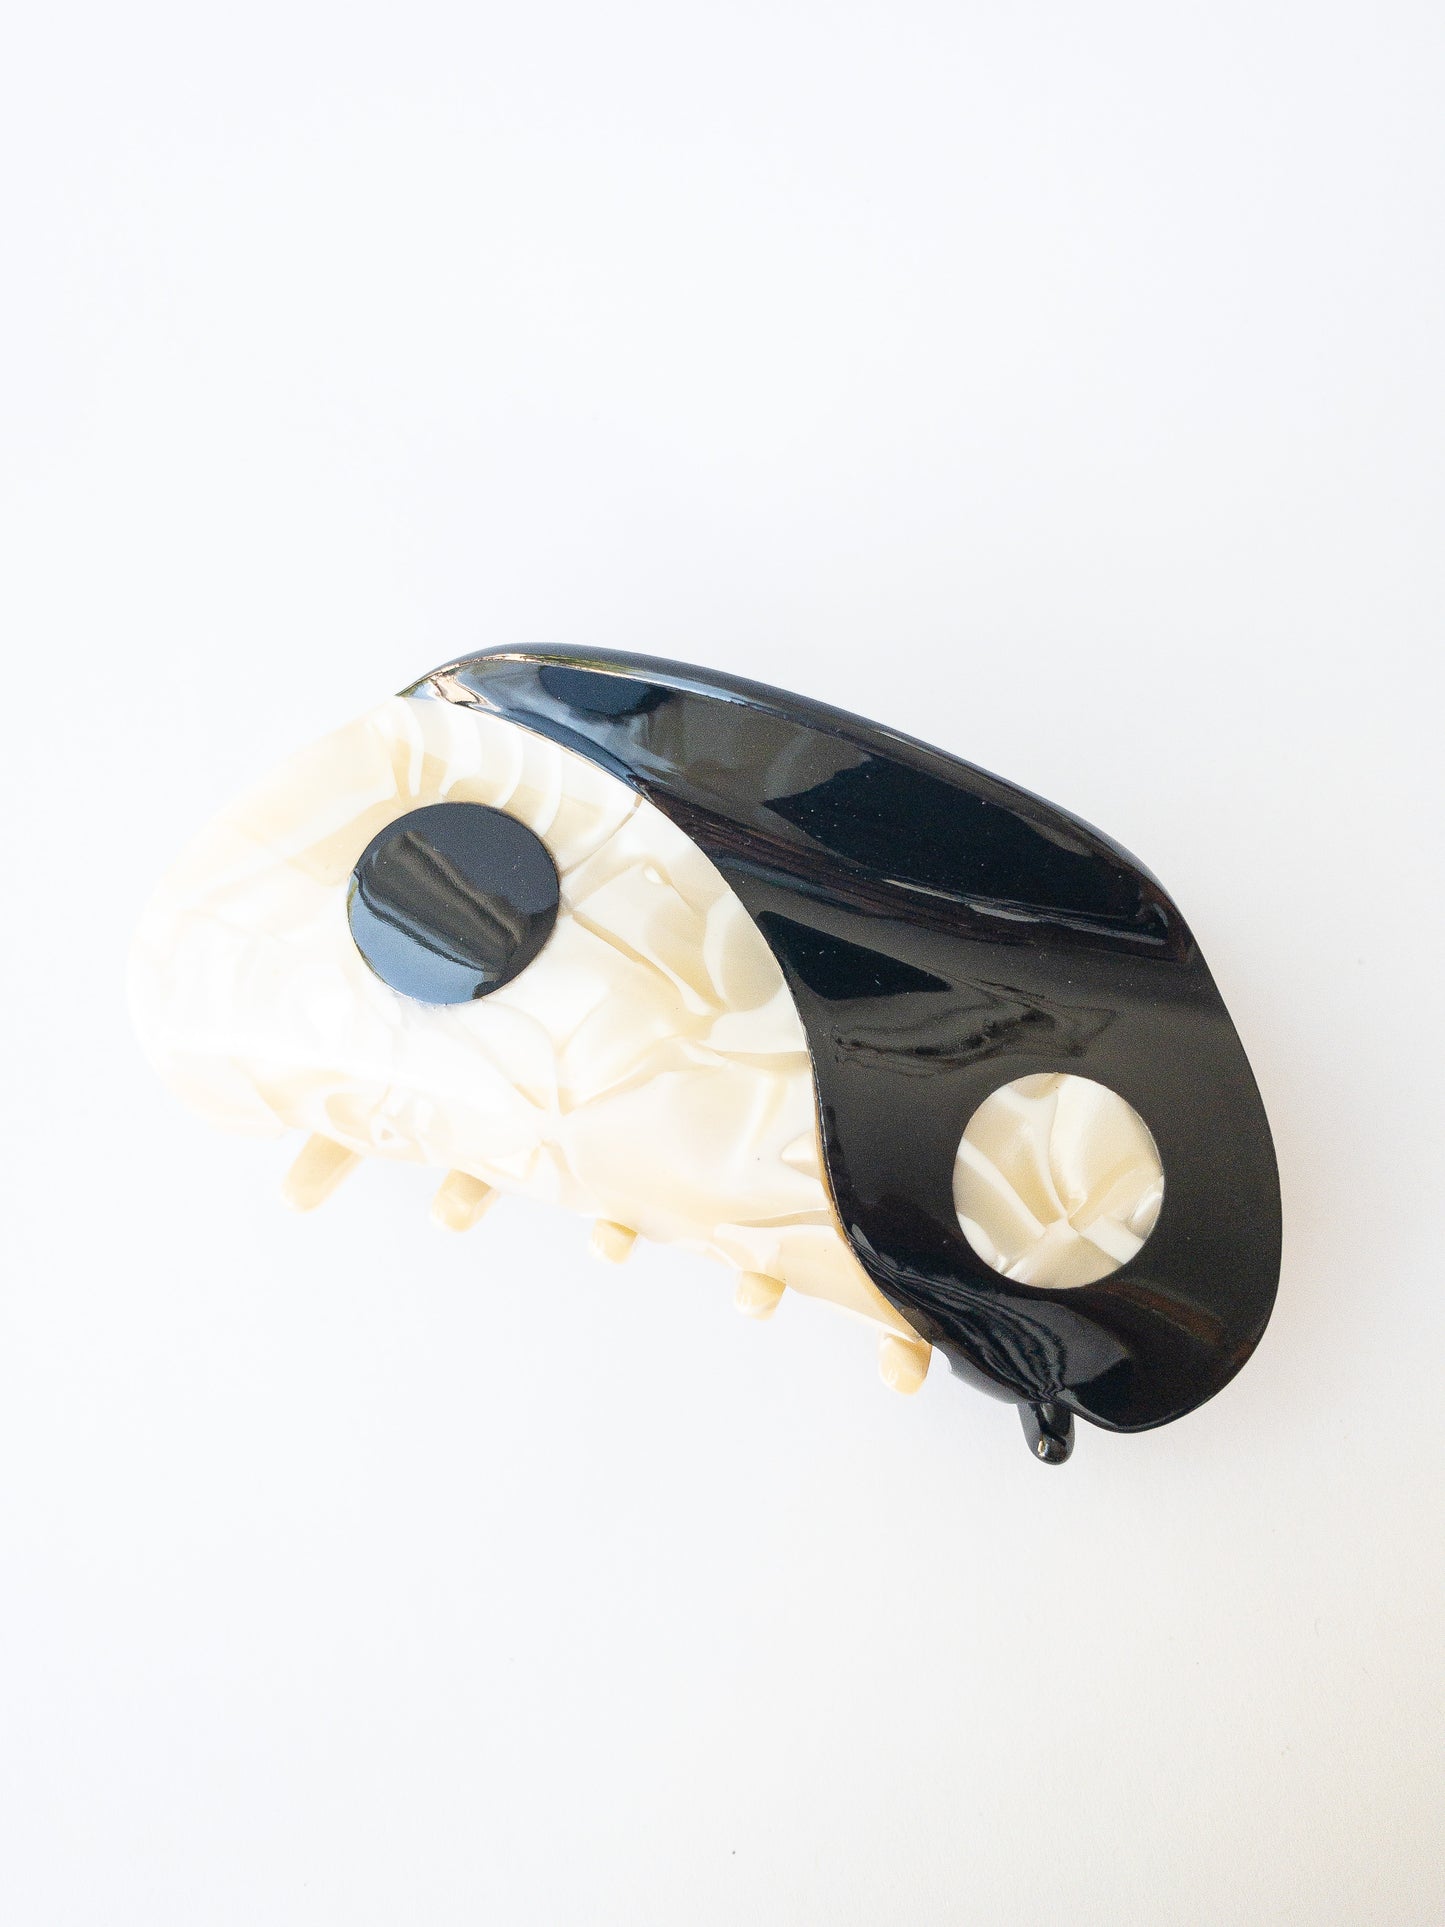 Large yin yang hair claw clip in a beautiful swirl of cream white and midnight black colors. This claw is shiny and strong, a great everyday staple.